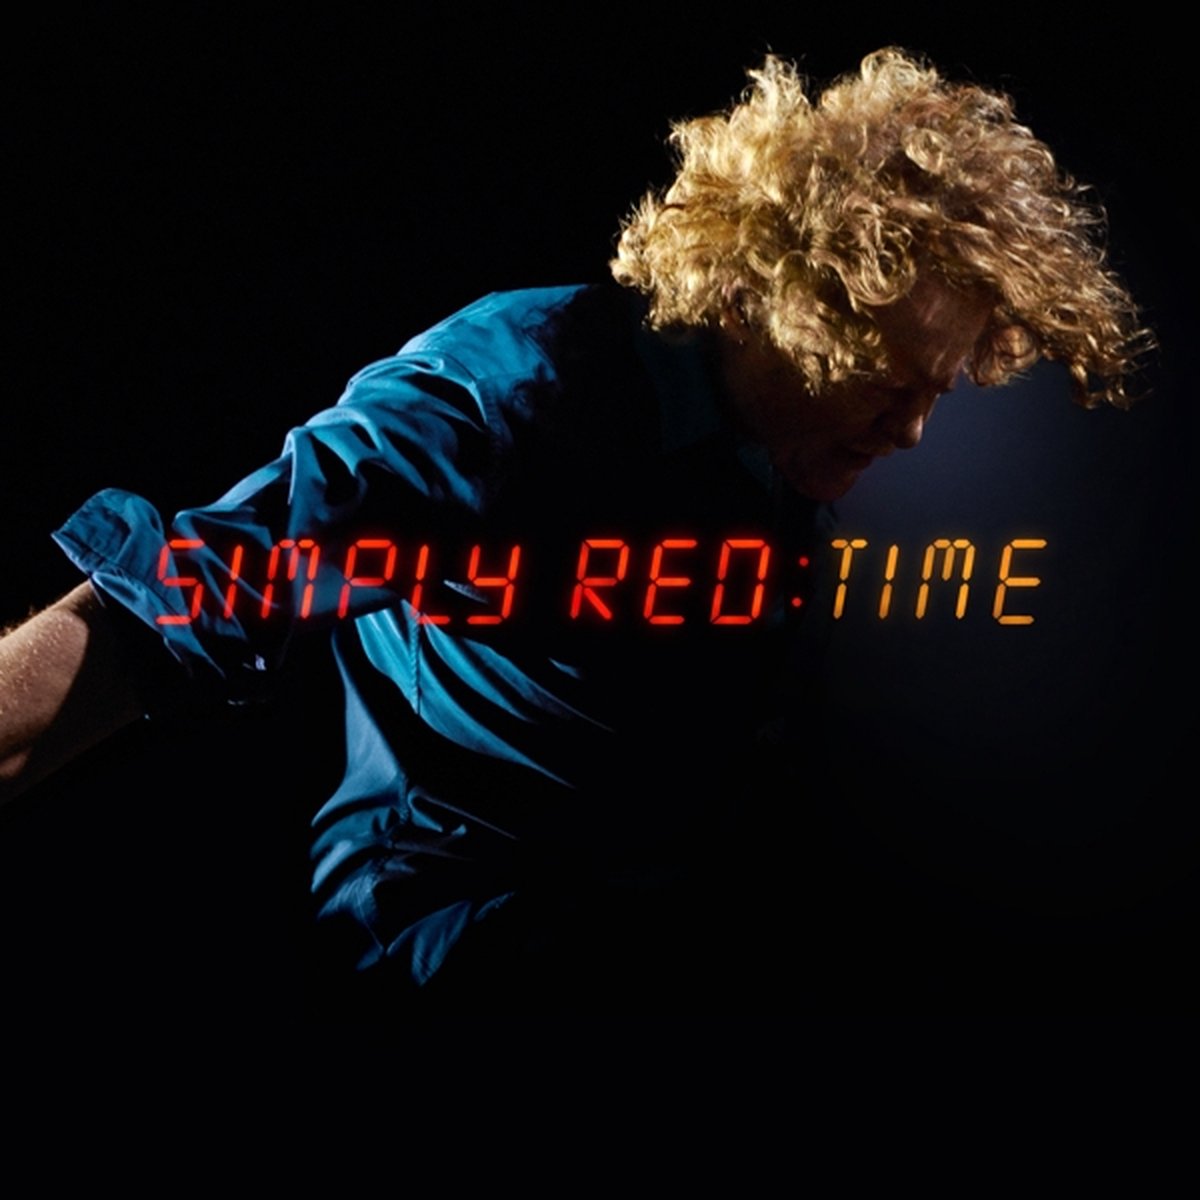 Simply Red - Time (Limited edition, gold vinyl) (LP)